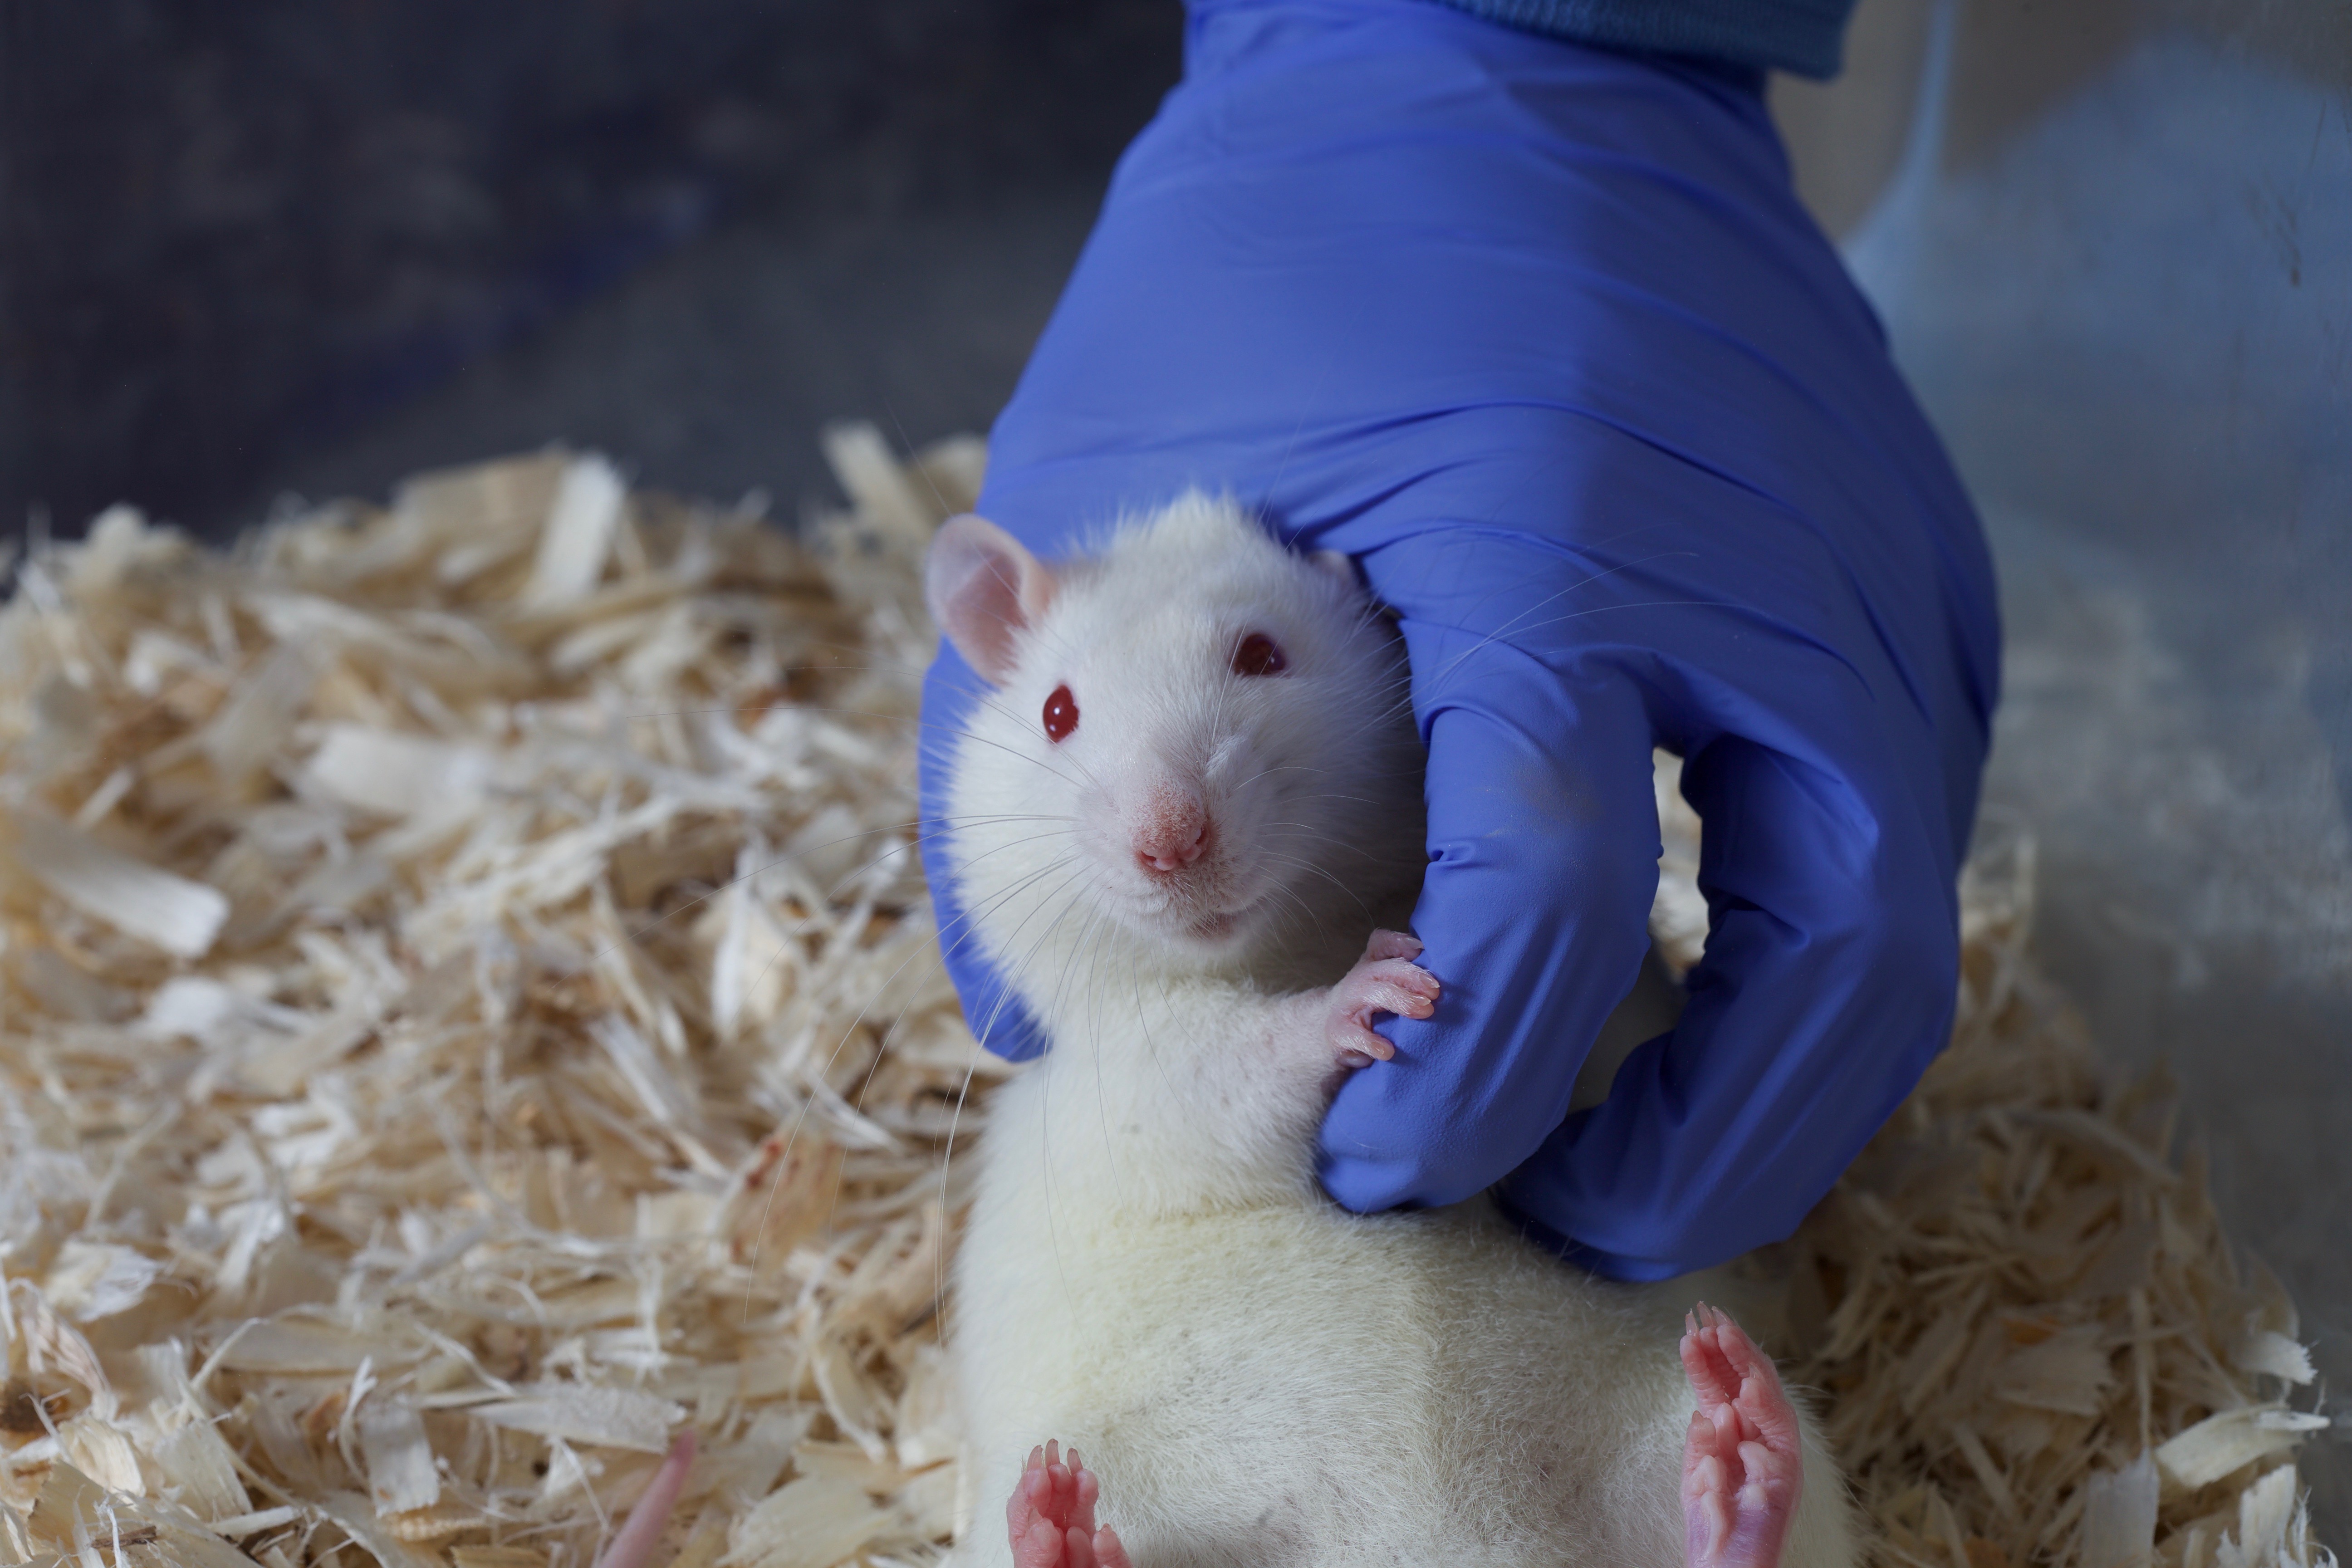 Rat tickling eases rats' stress for testing